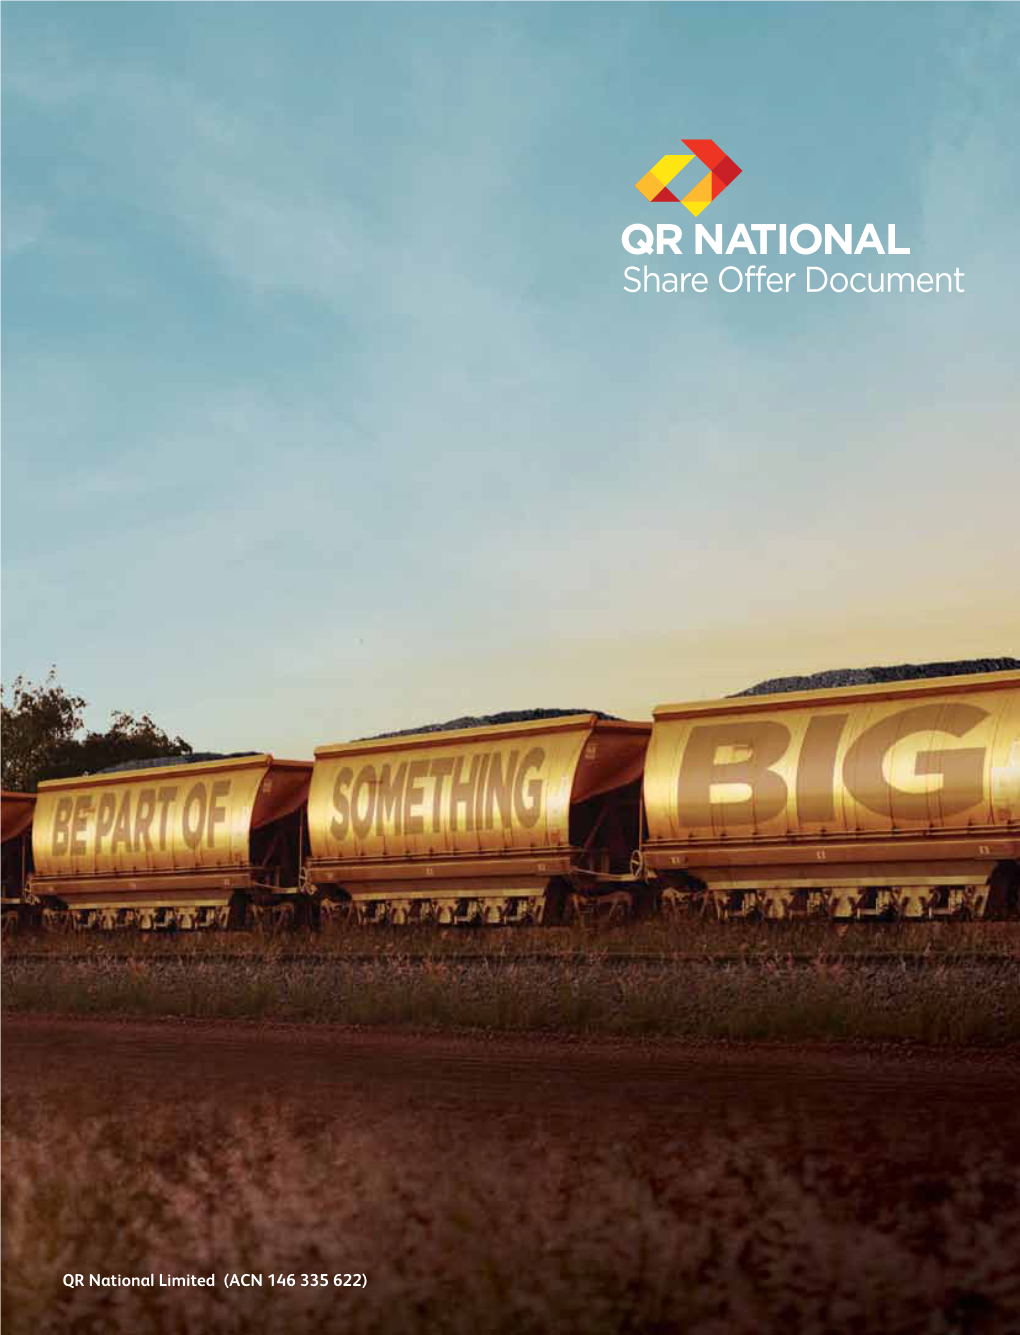 QR National Limited (ACN 146 335 622) an Iconic Australian Business with Over 145 Years of History